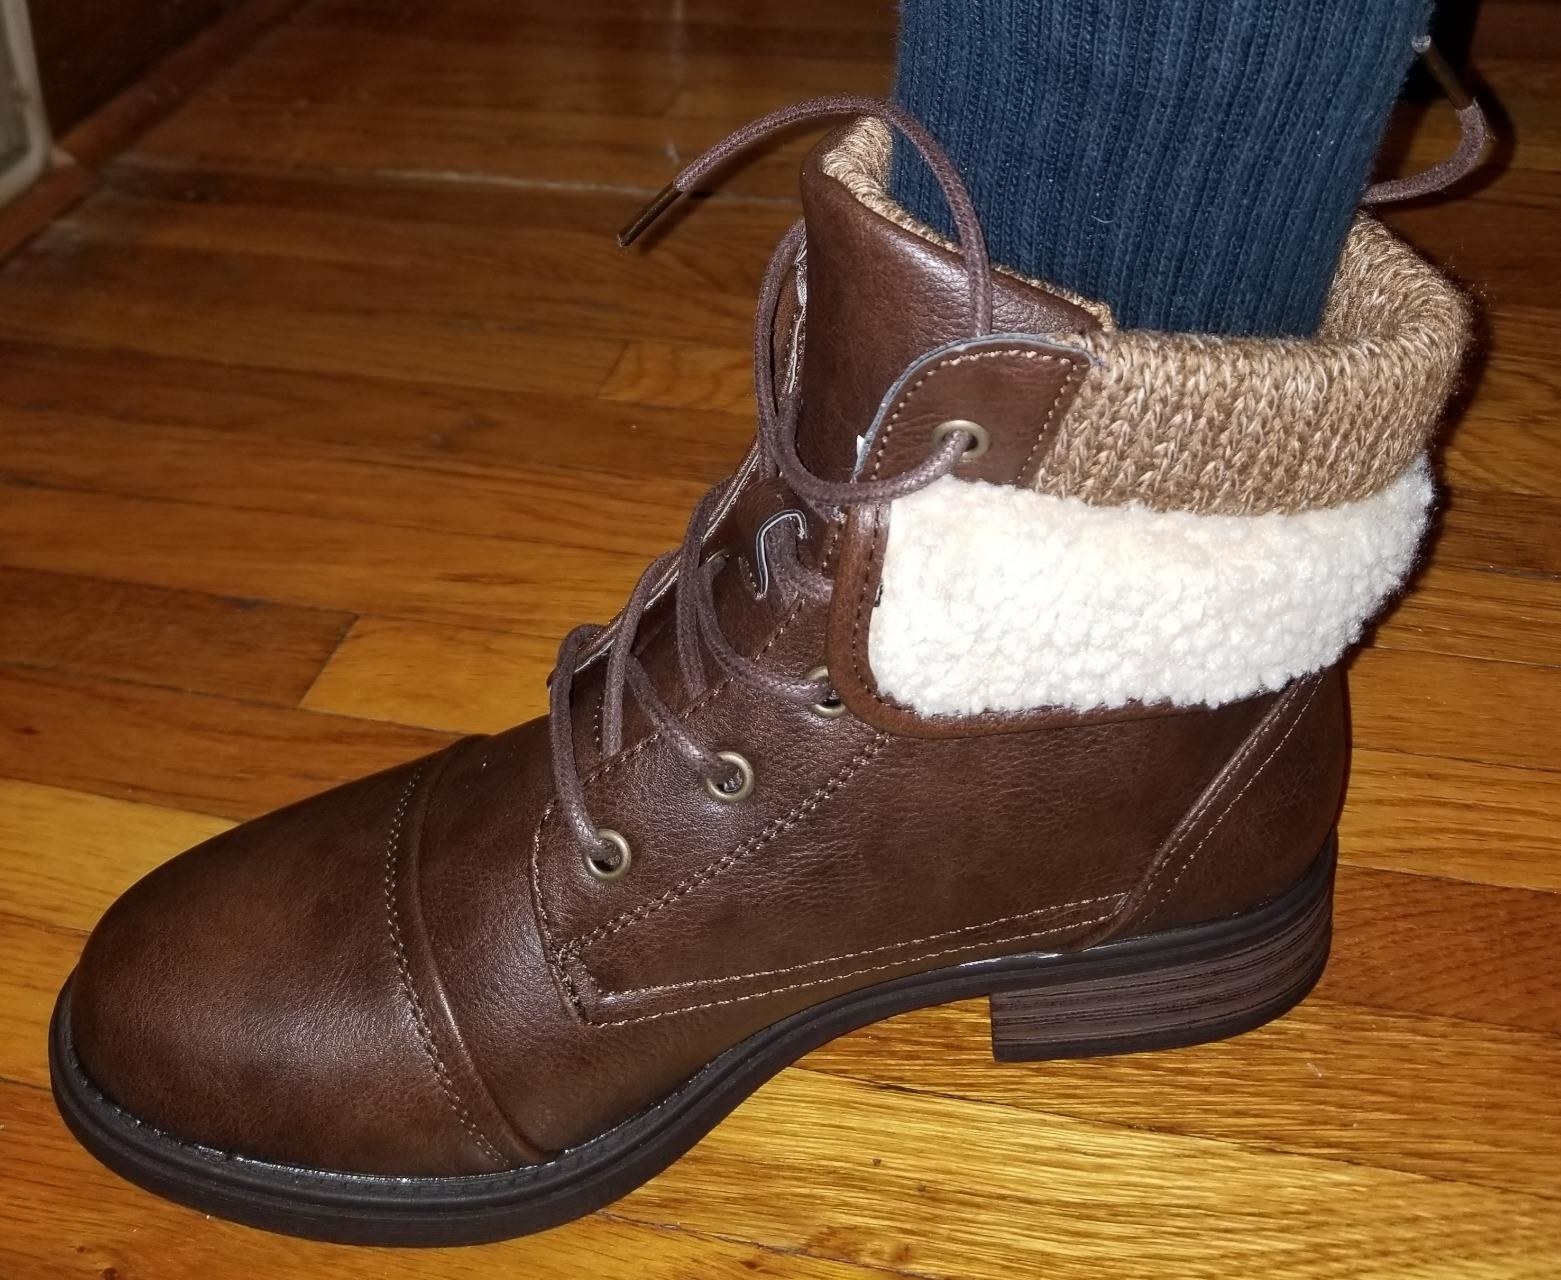 Reviewer wearing brown boot